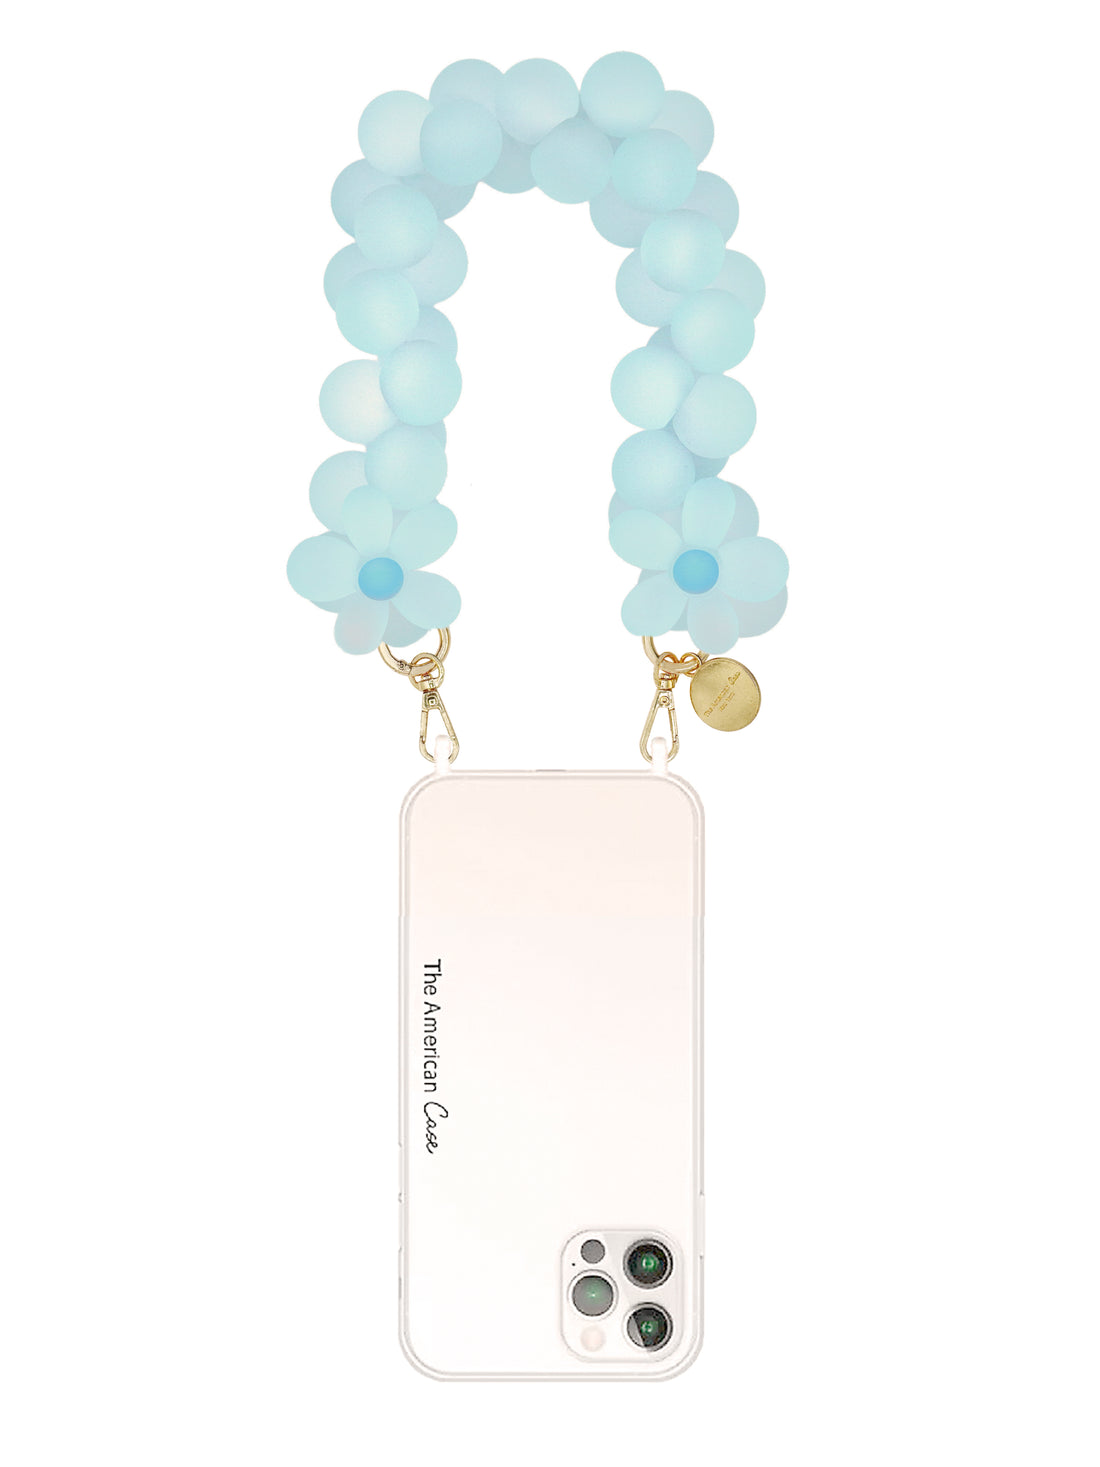 Glacier - Flower and Round Matt Bead Bracelet Phone Chain with Golden Carabiners